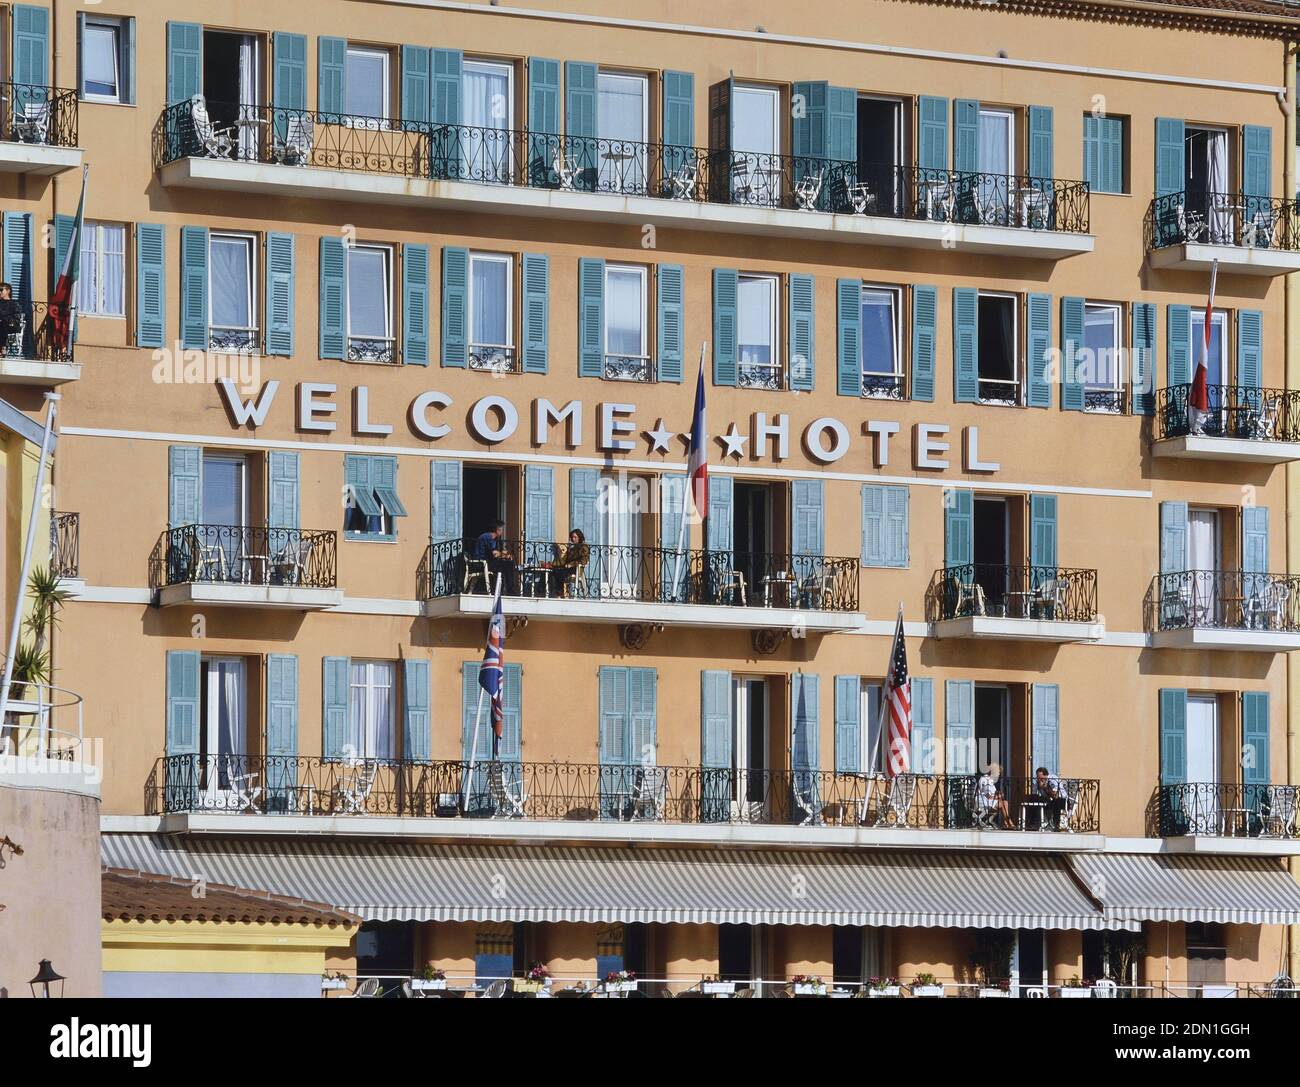 The Welcome Hotel, Villefranche-sur-Mer, Provence-Alpes-Côte dAzur region, South of France Stock Photo